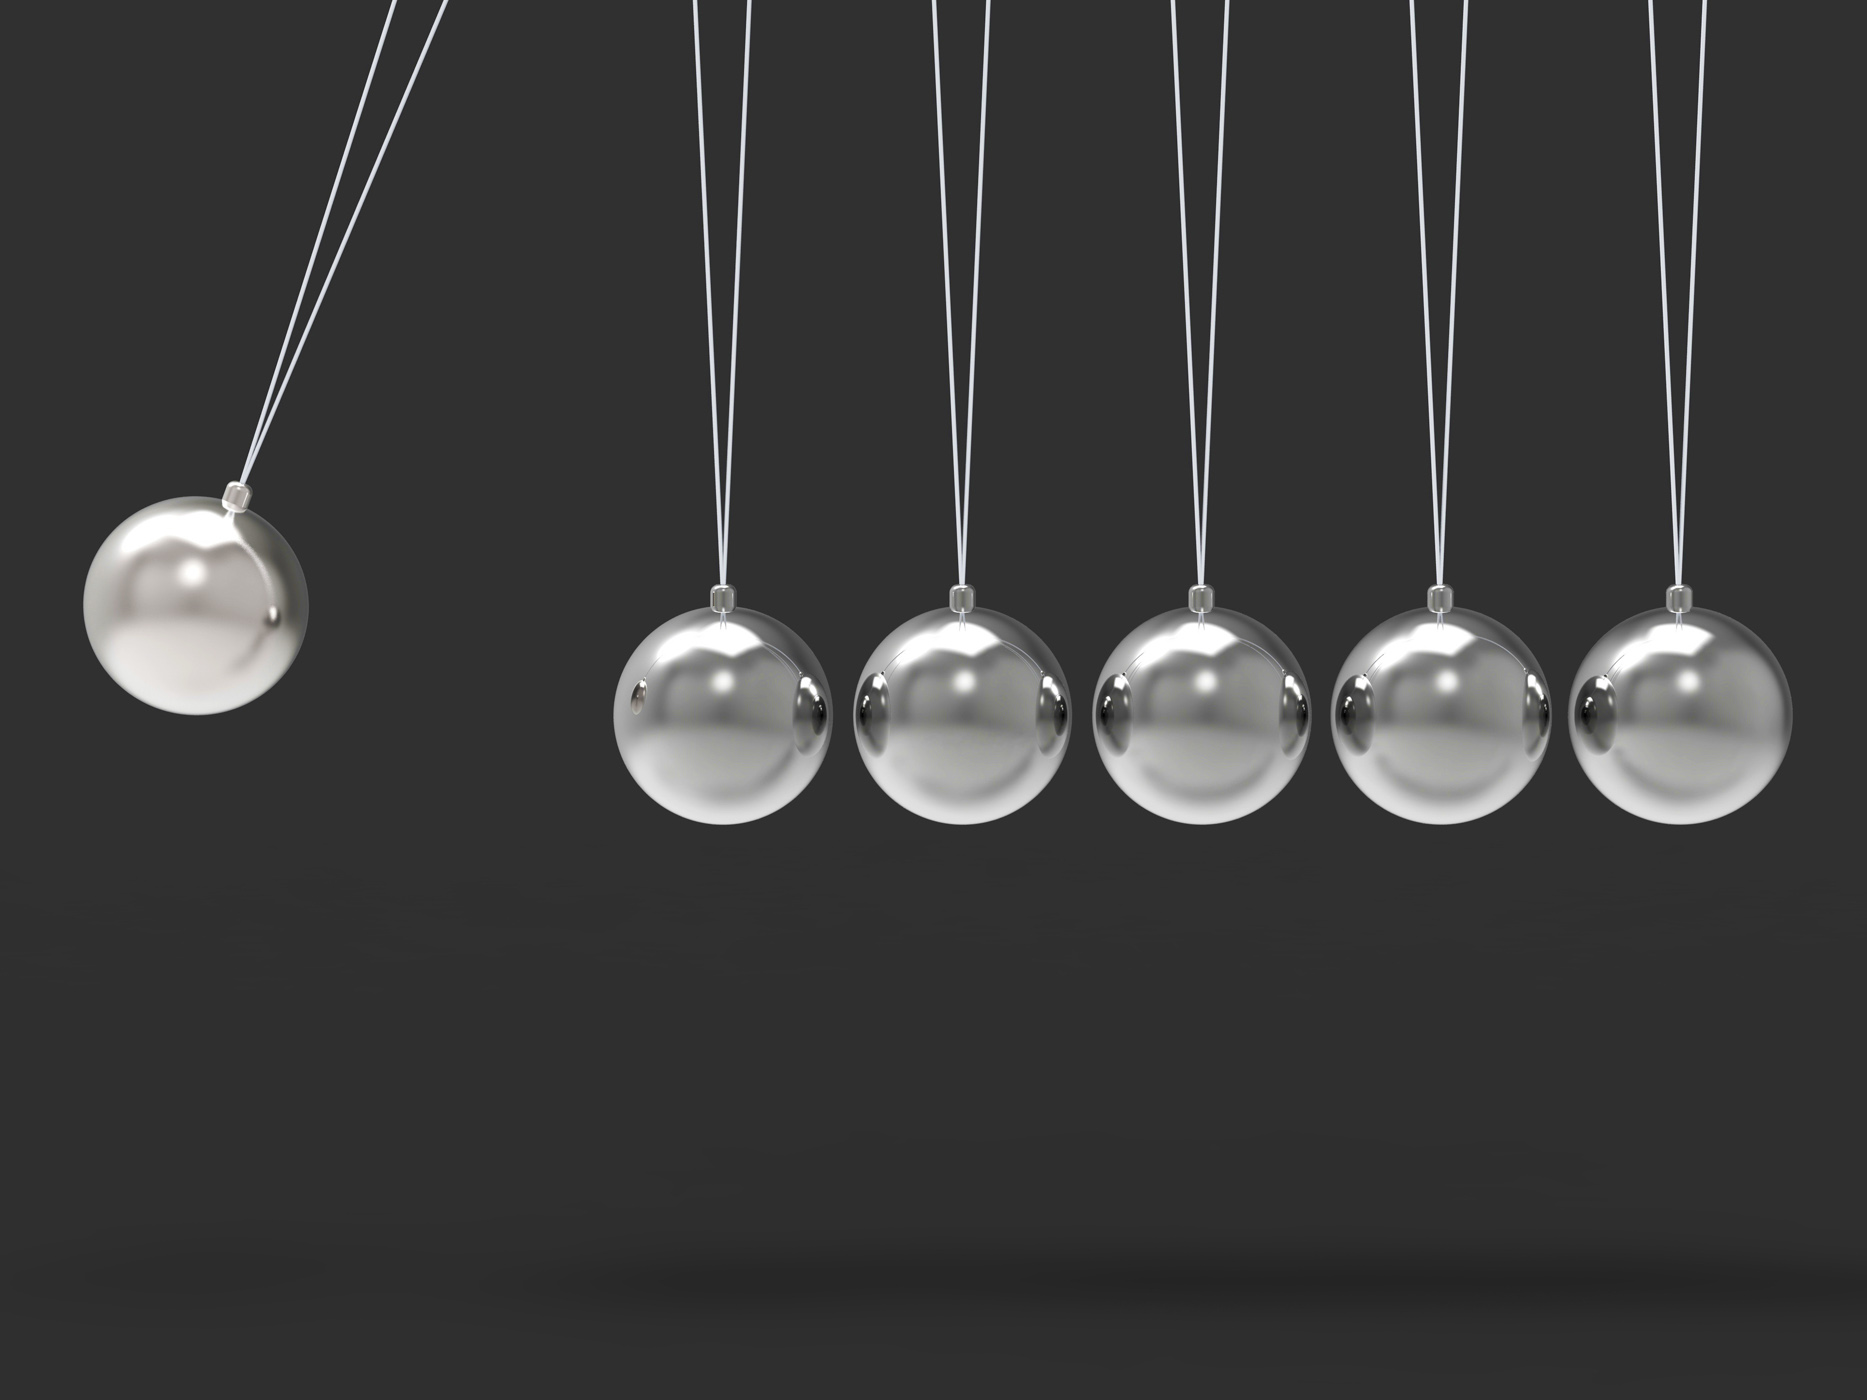 Six silver newtons cradle shows blank spheres copyspace for 6 letter w photo